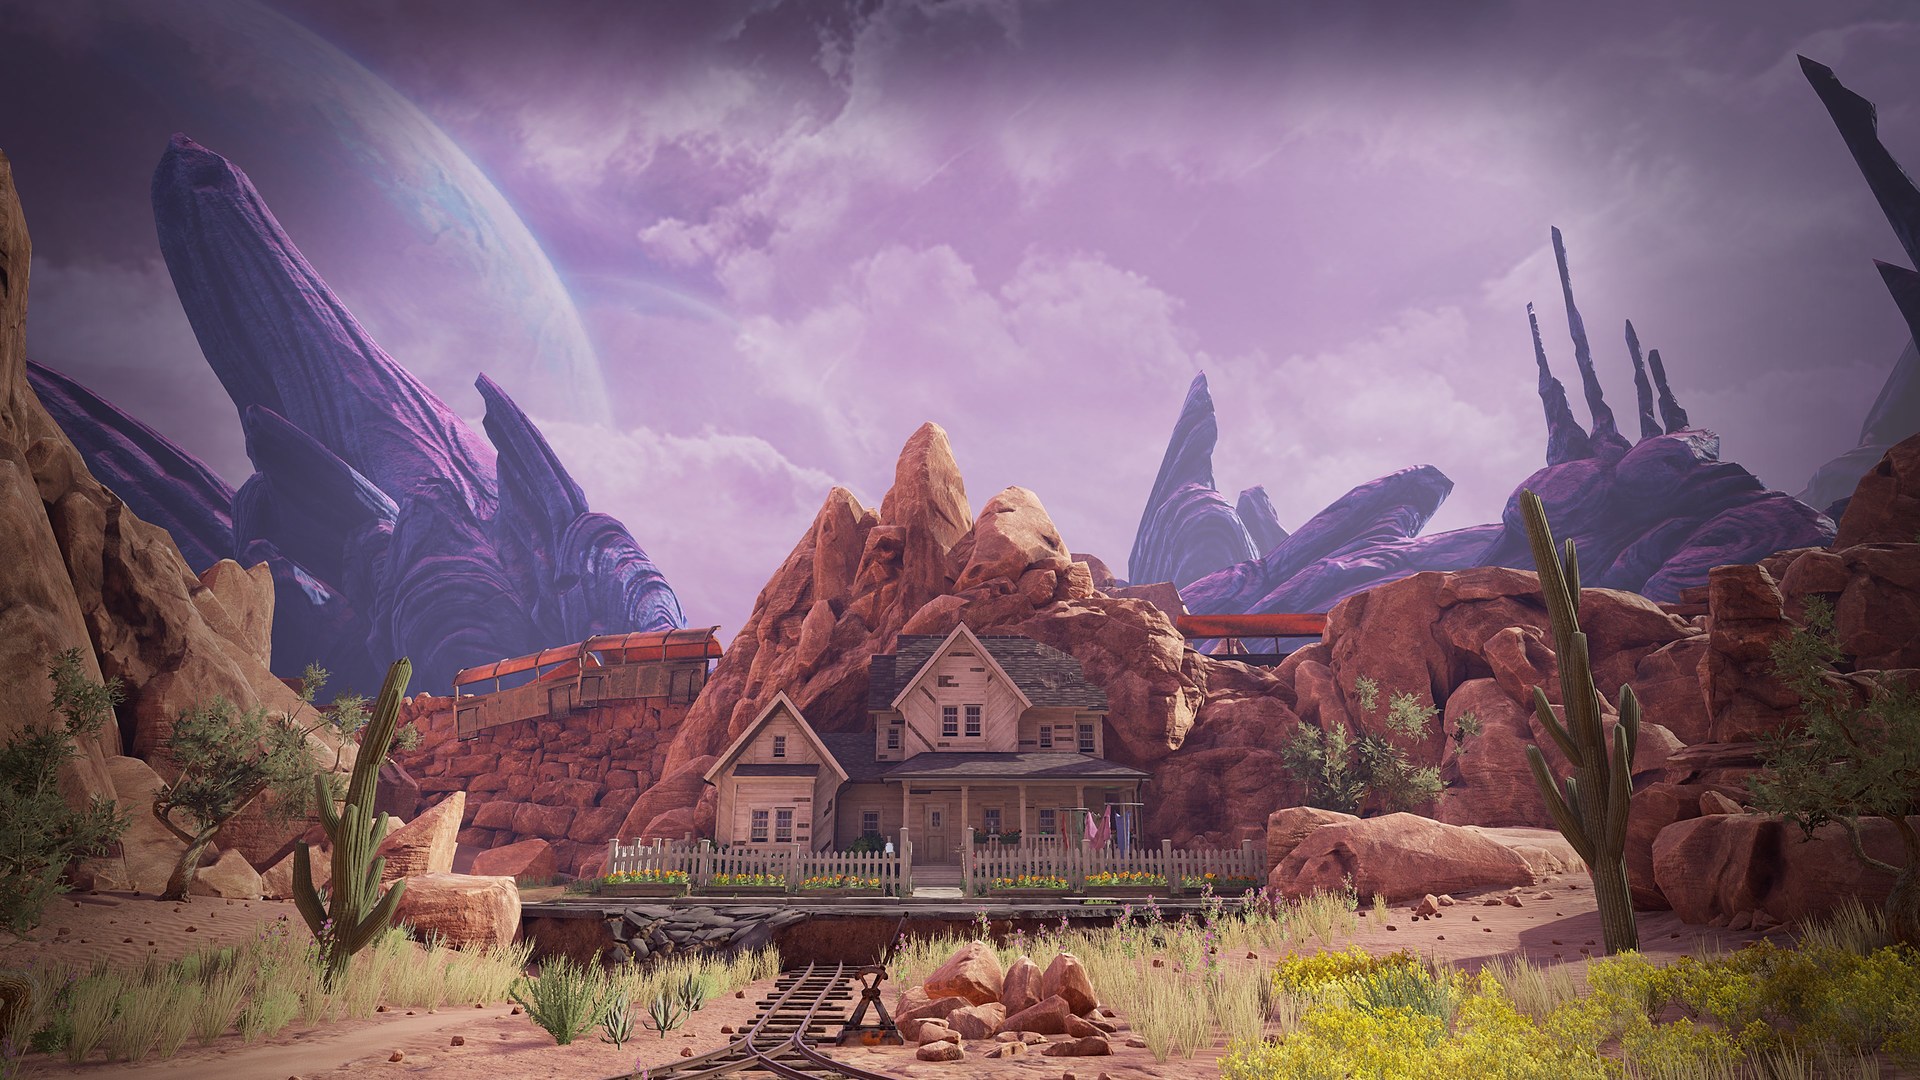 obduction playstation download free